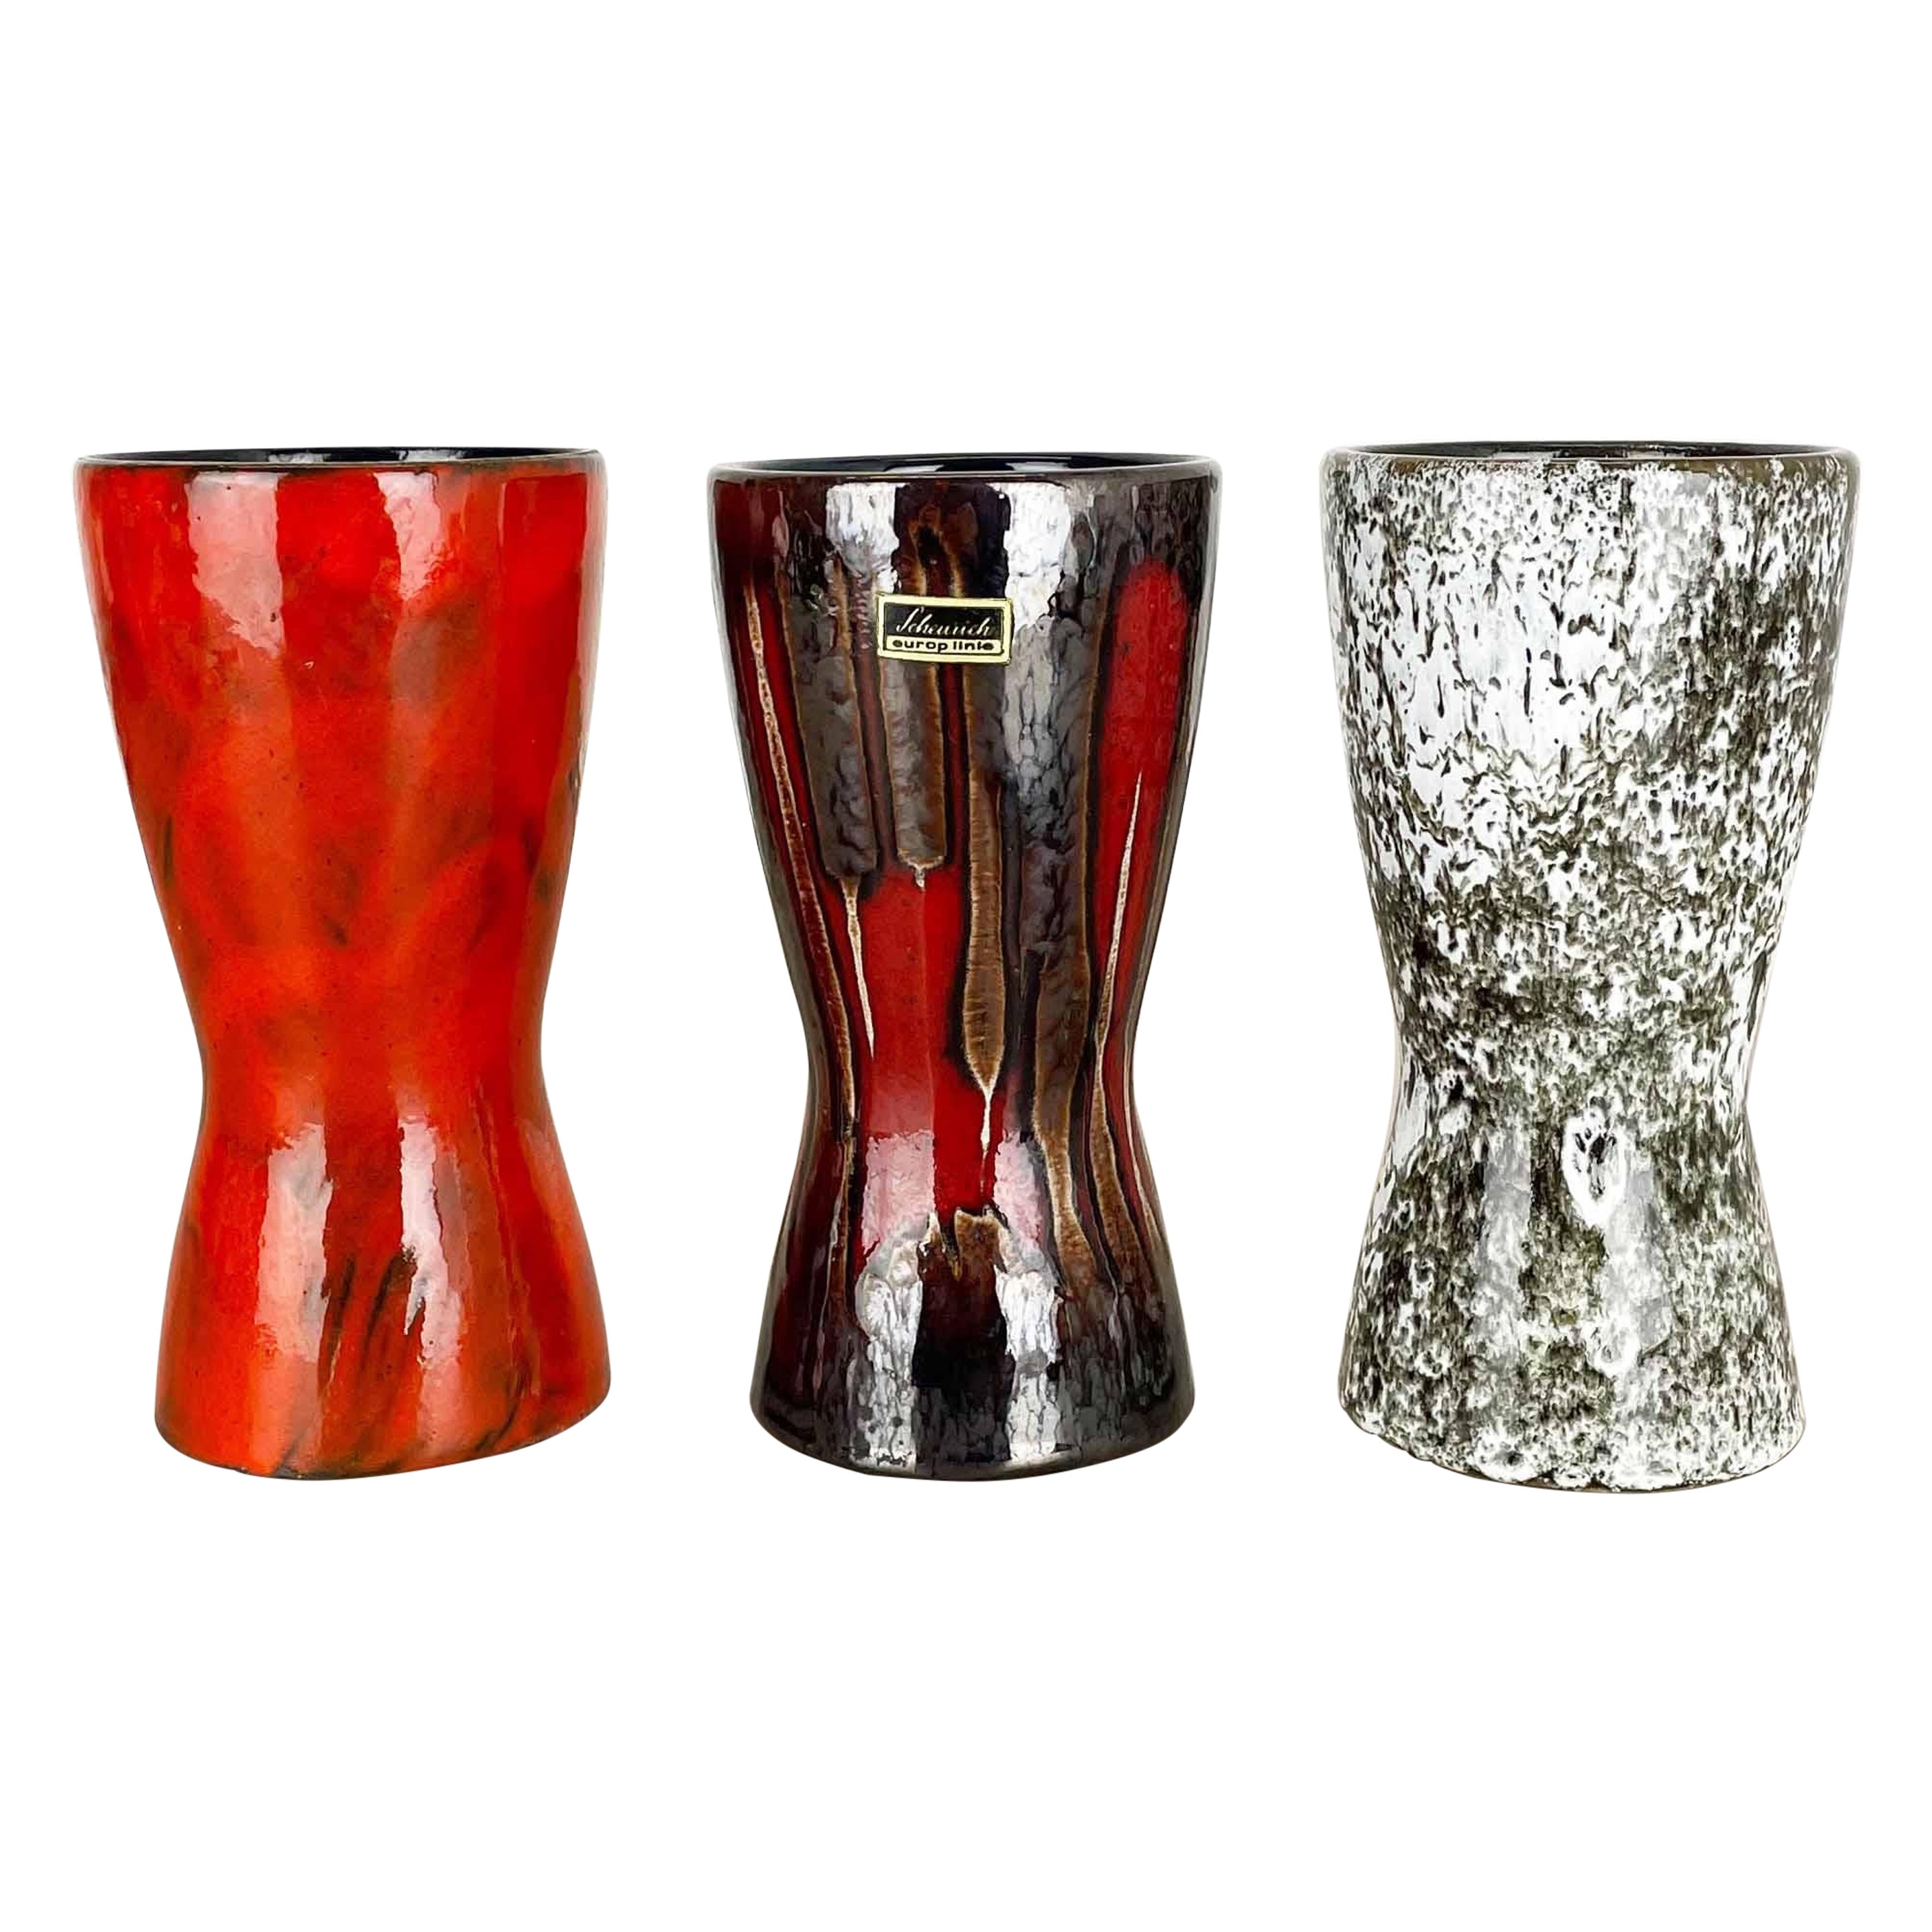 Set of three Vintage Pottery Fat Lava Vases Made by Scheurich, Germany, 1970s For Sale